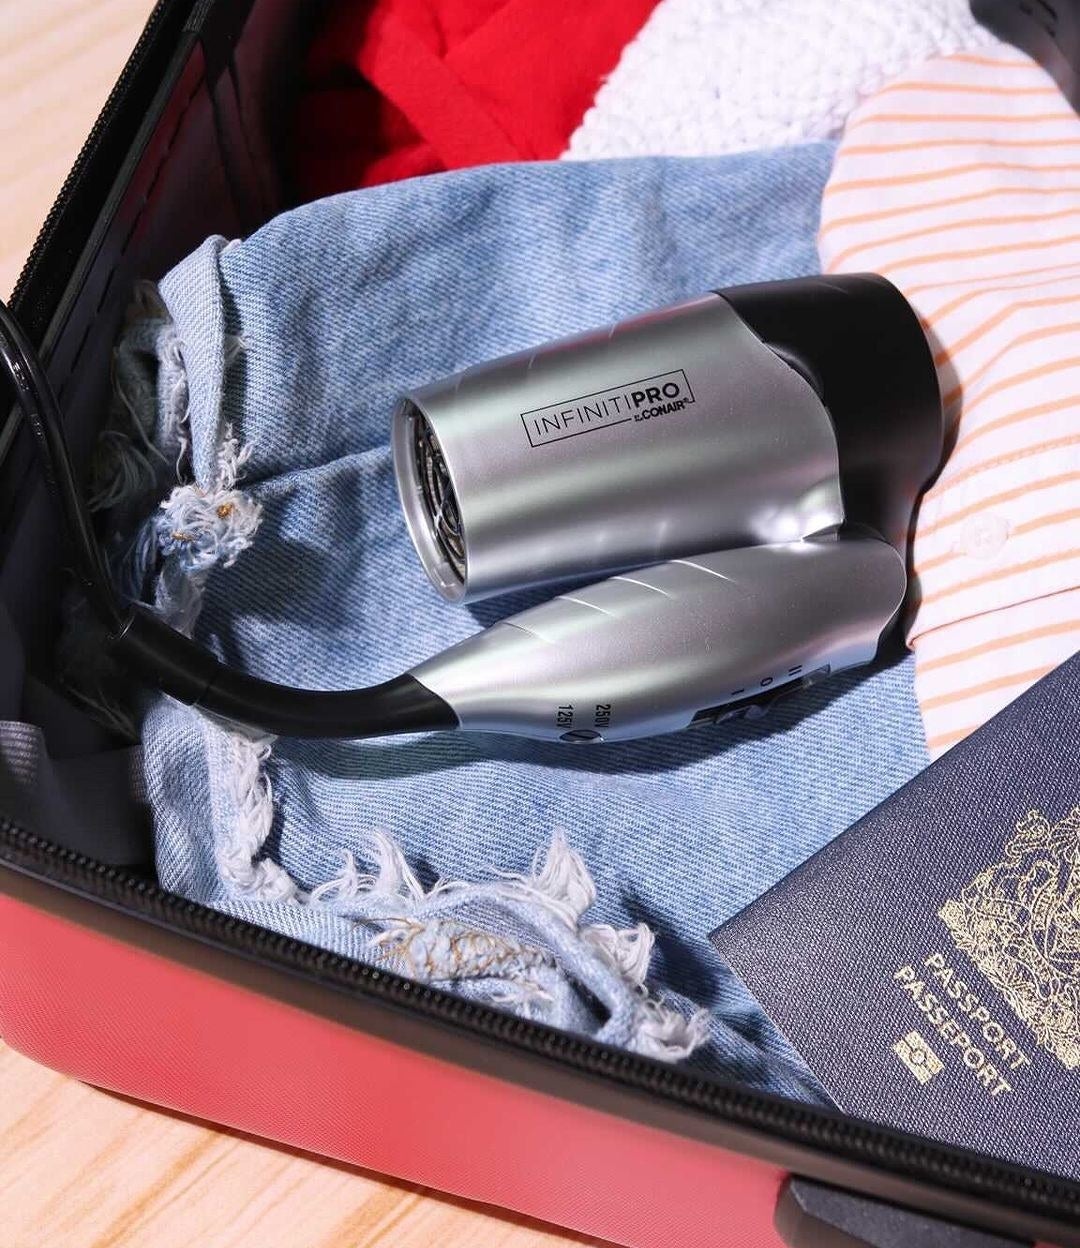 the folded hair dryer tucked into a suitcase with clothing and a passport